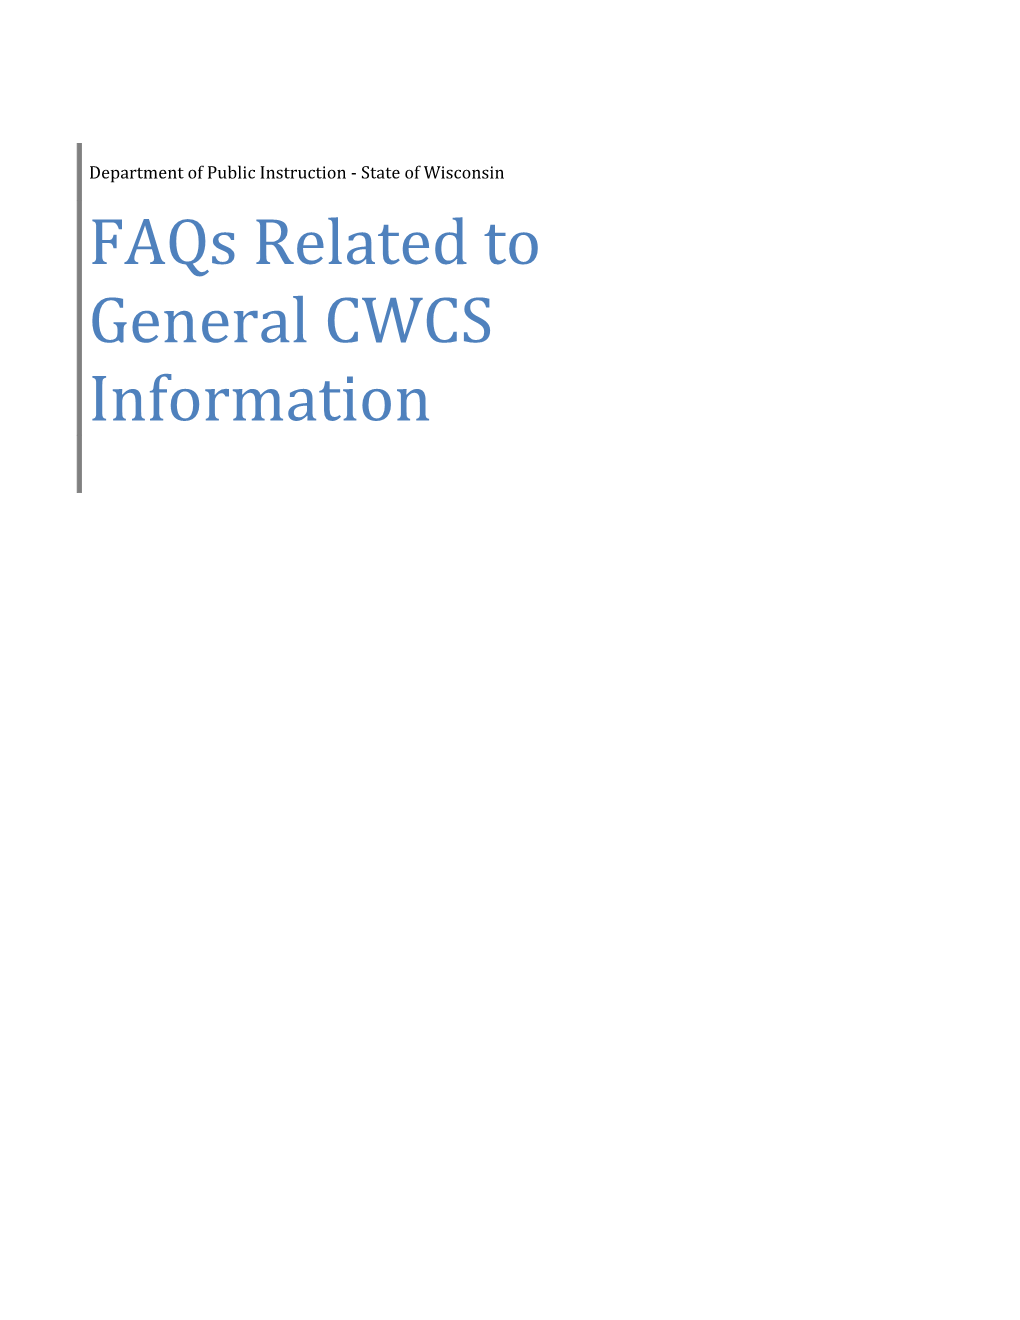 Faqs Related to General CWCS Information